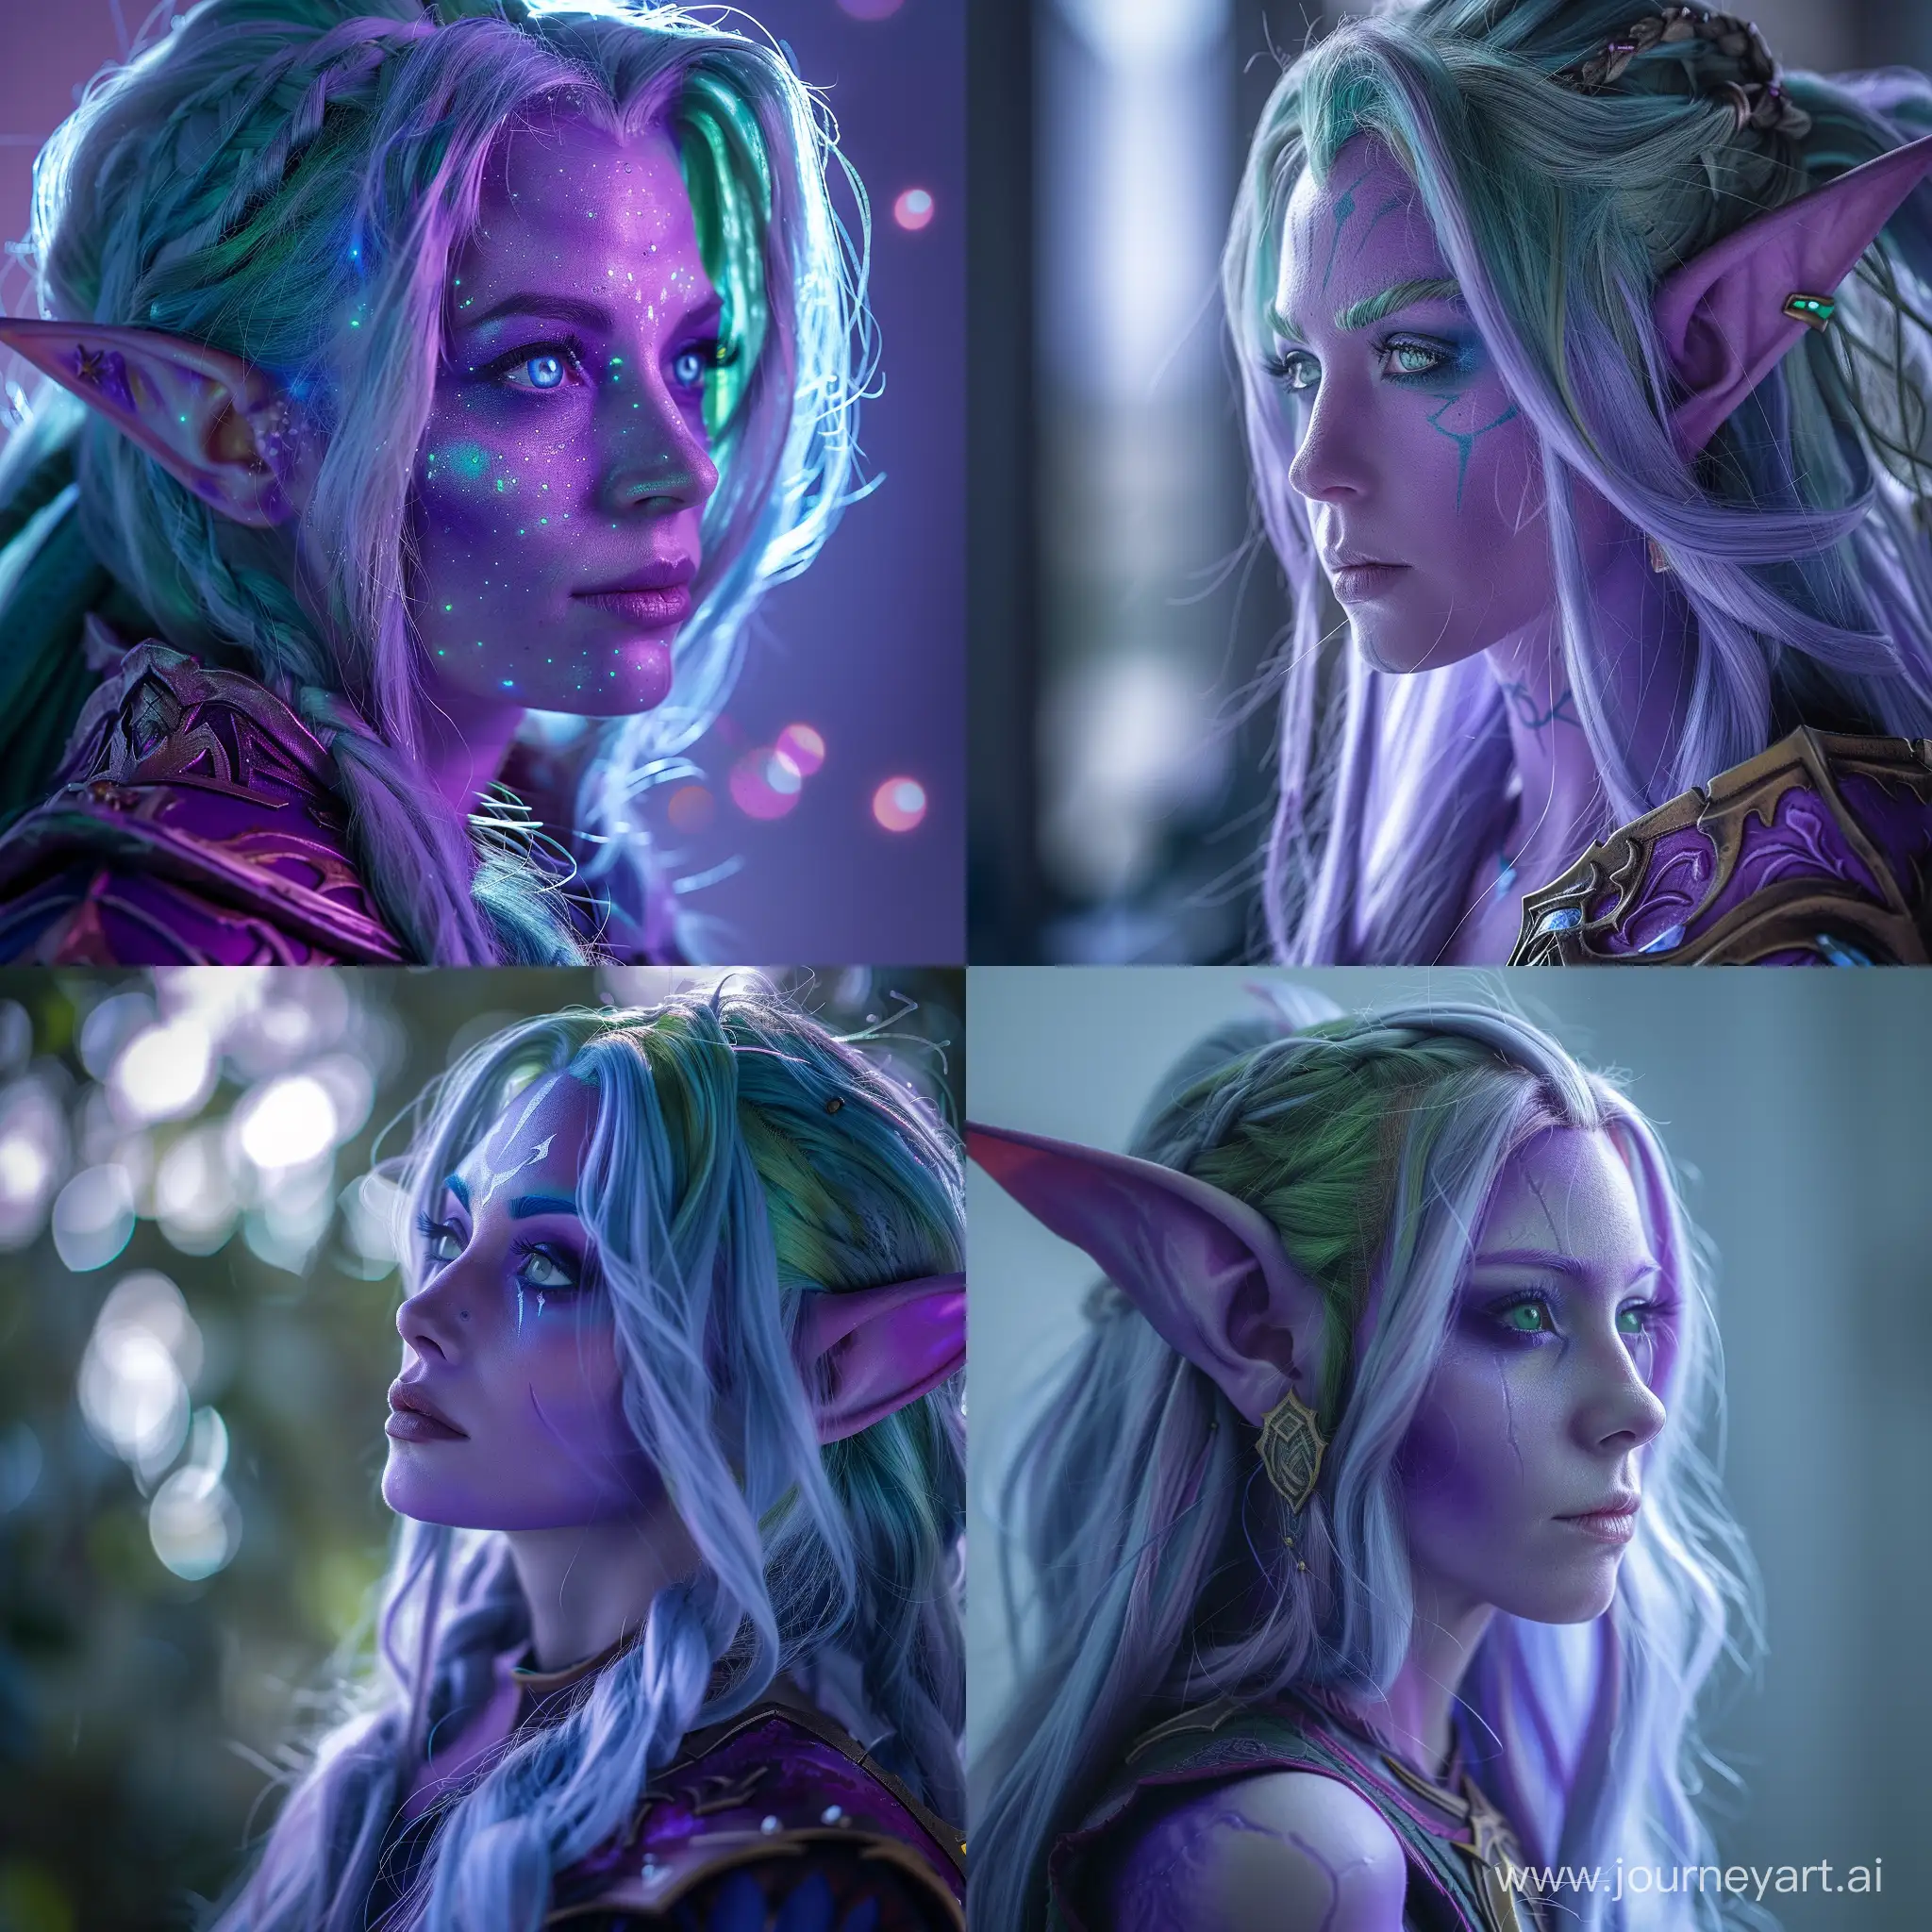 world of warcraft Tyrande Whisperwind character, light-purple skin, blue-green hair, hyber detailed, modelcore, portrait photo. use sony a7 II camera with an 30mm lens fat F.1.2 aperture setting to blur the background and isolate the subject. use distinctive lighting on the subjects shot. The image should be shot in ultra-high resolution. --v 6